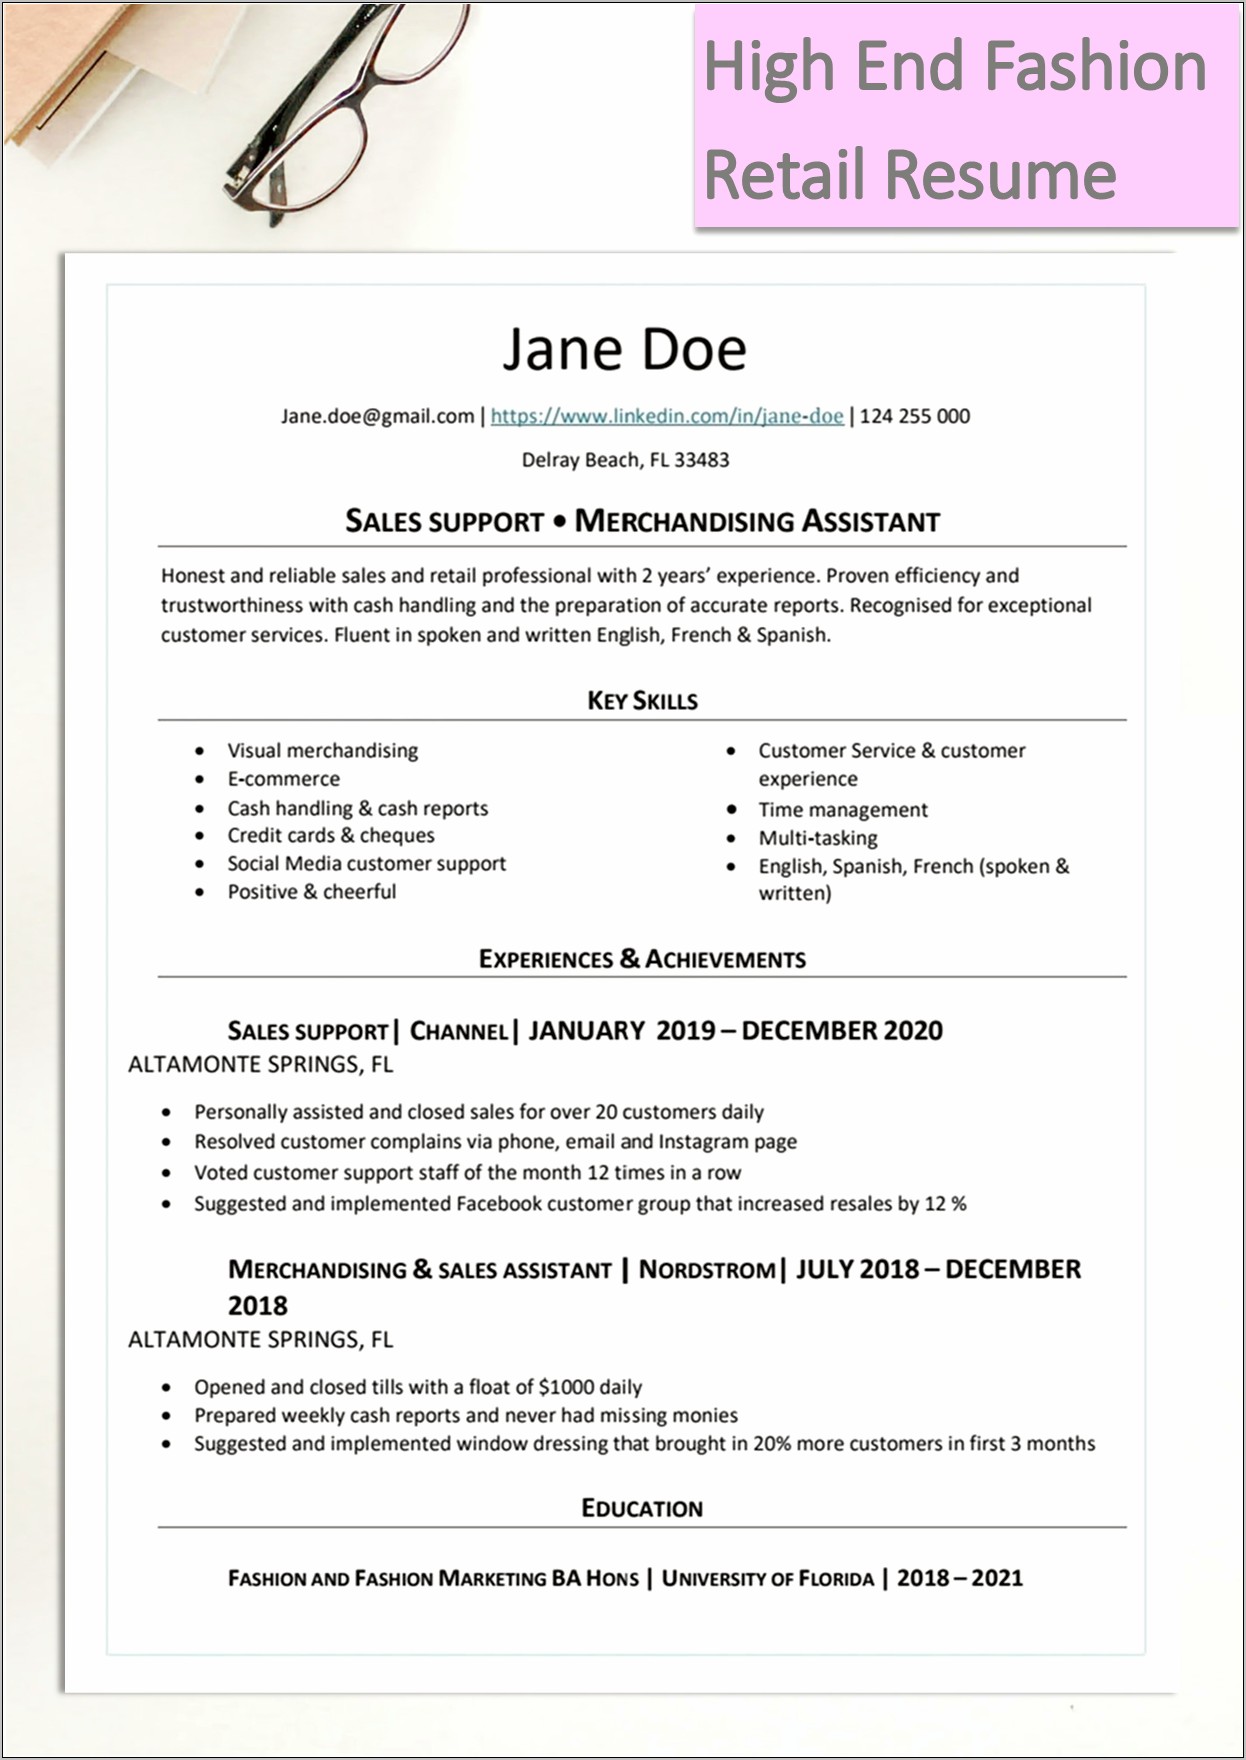 Objective For Fashion Retail Resume